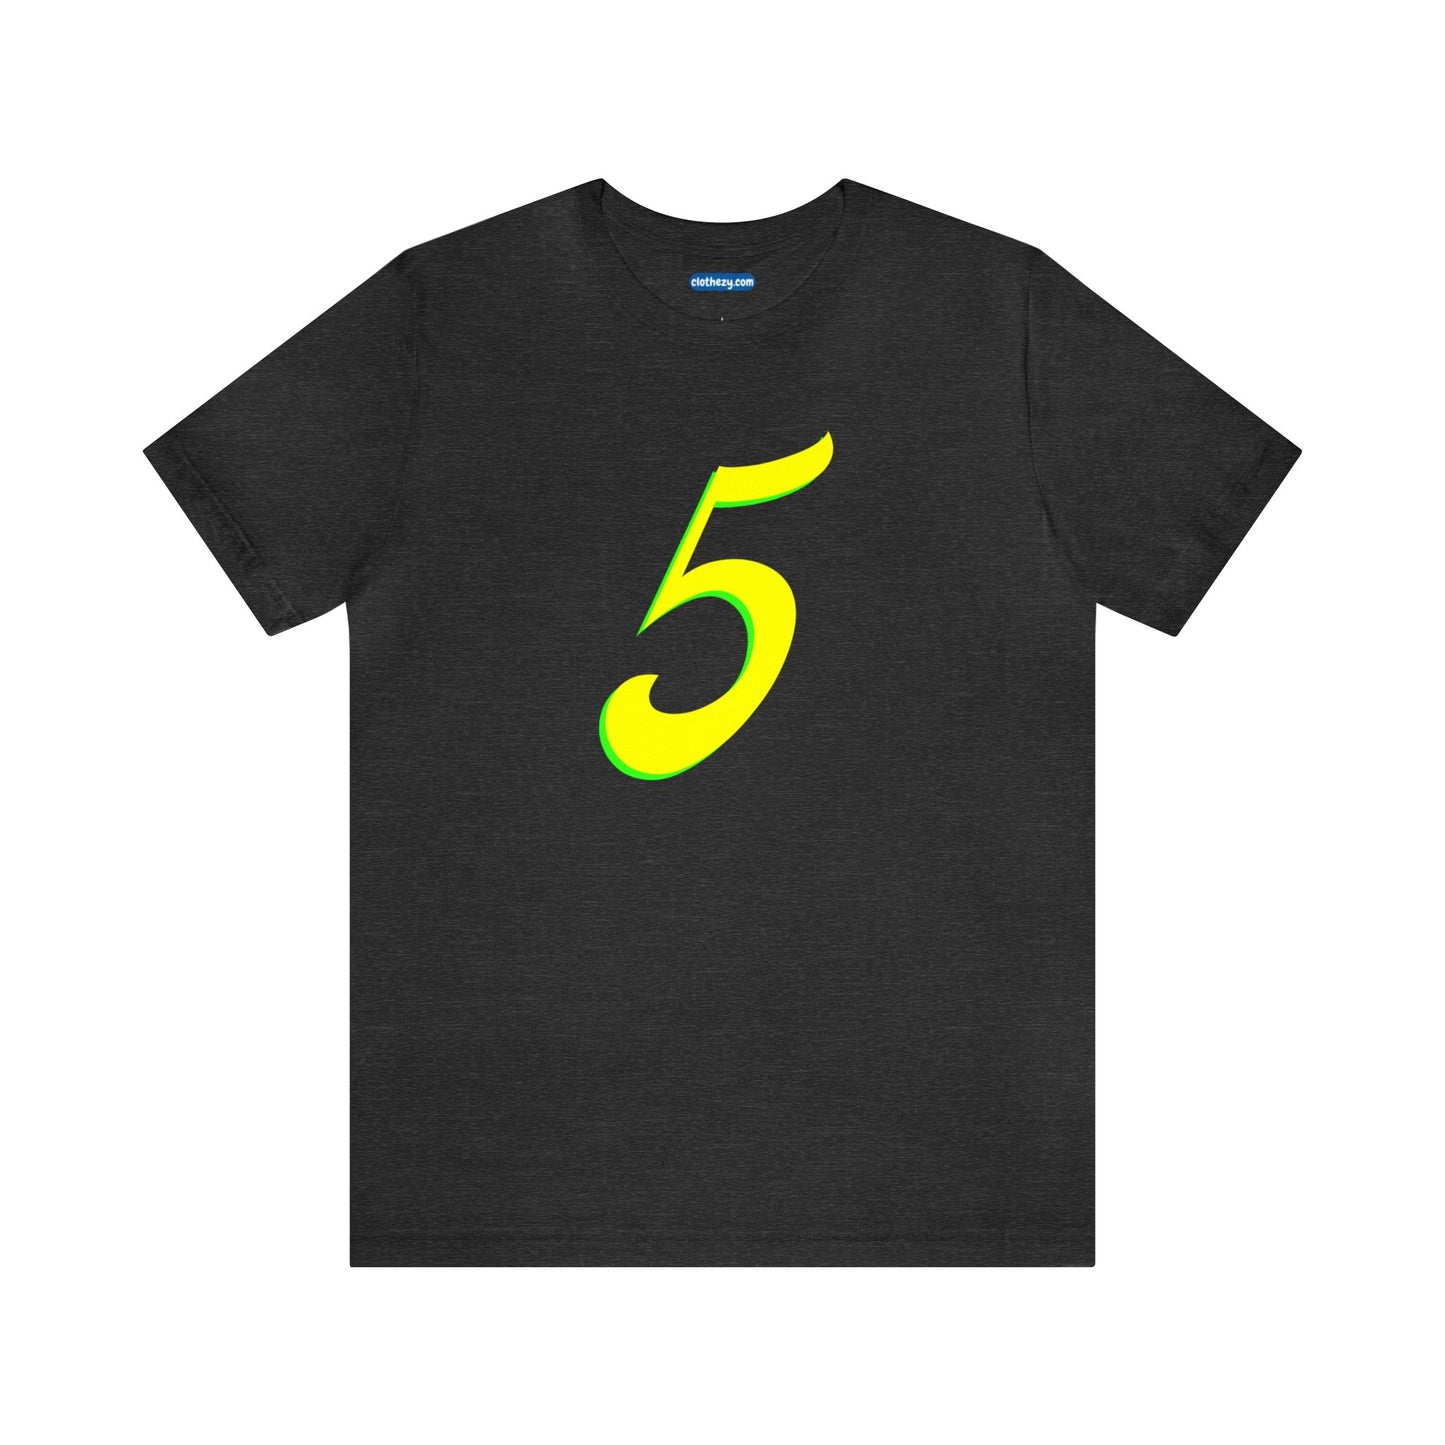 Number 5 Design - Soft Cotton Tee for birthdays and celebrations, Gift for friends and family, Multiple Options by clothezy.com in Gold Size Small - Buy Now